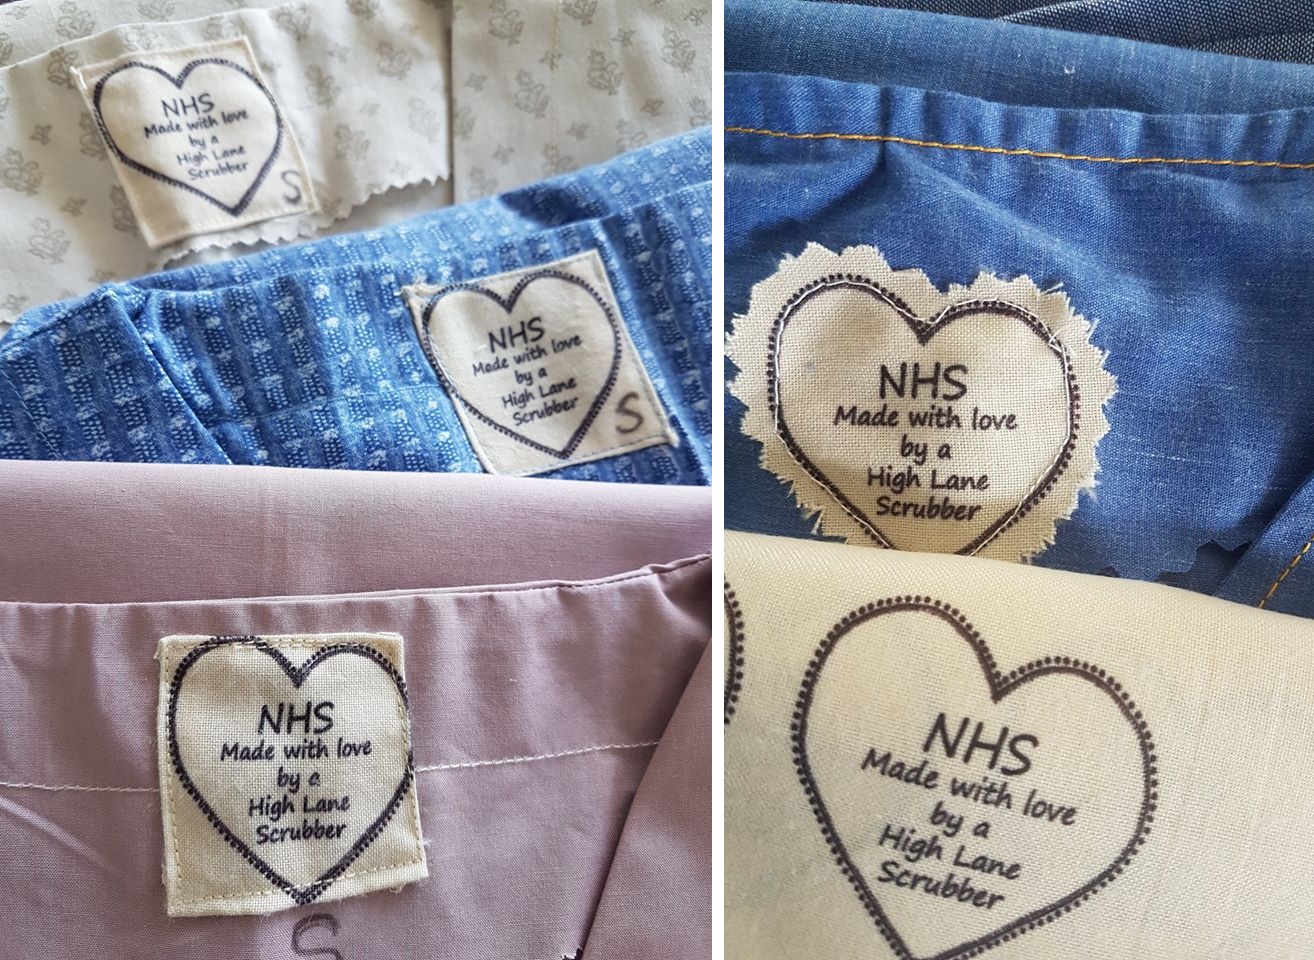 This Mancunian sewing group has made thousands of scrubs for those in need, The Manc